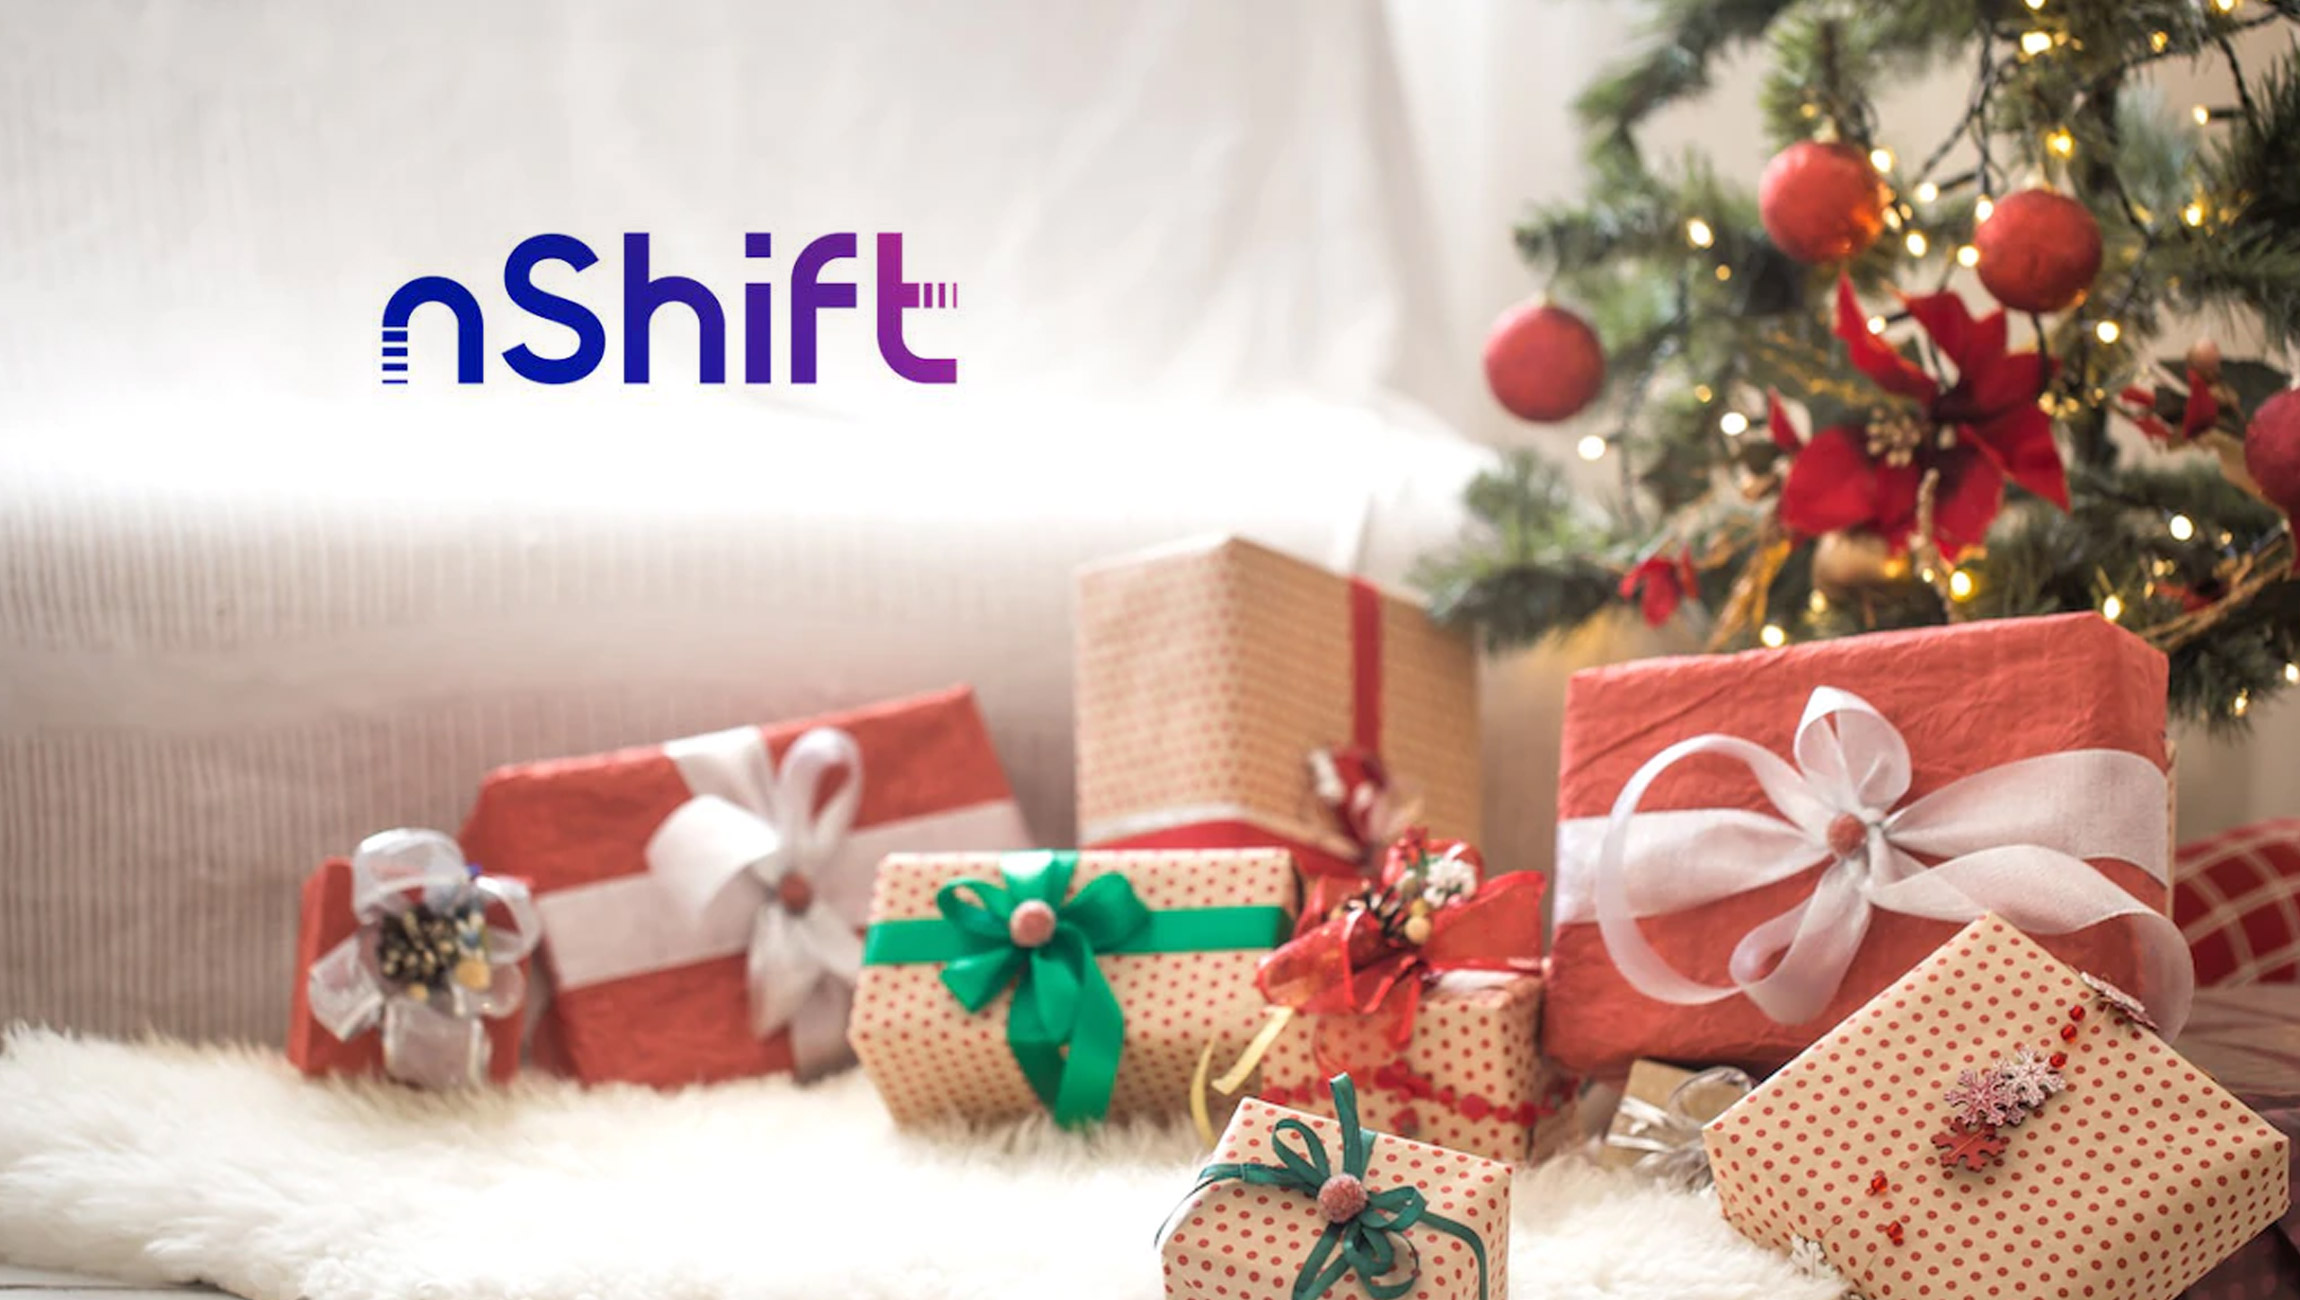 nShift: People begin returning unwanted Christmas presents within days